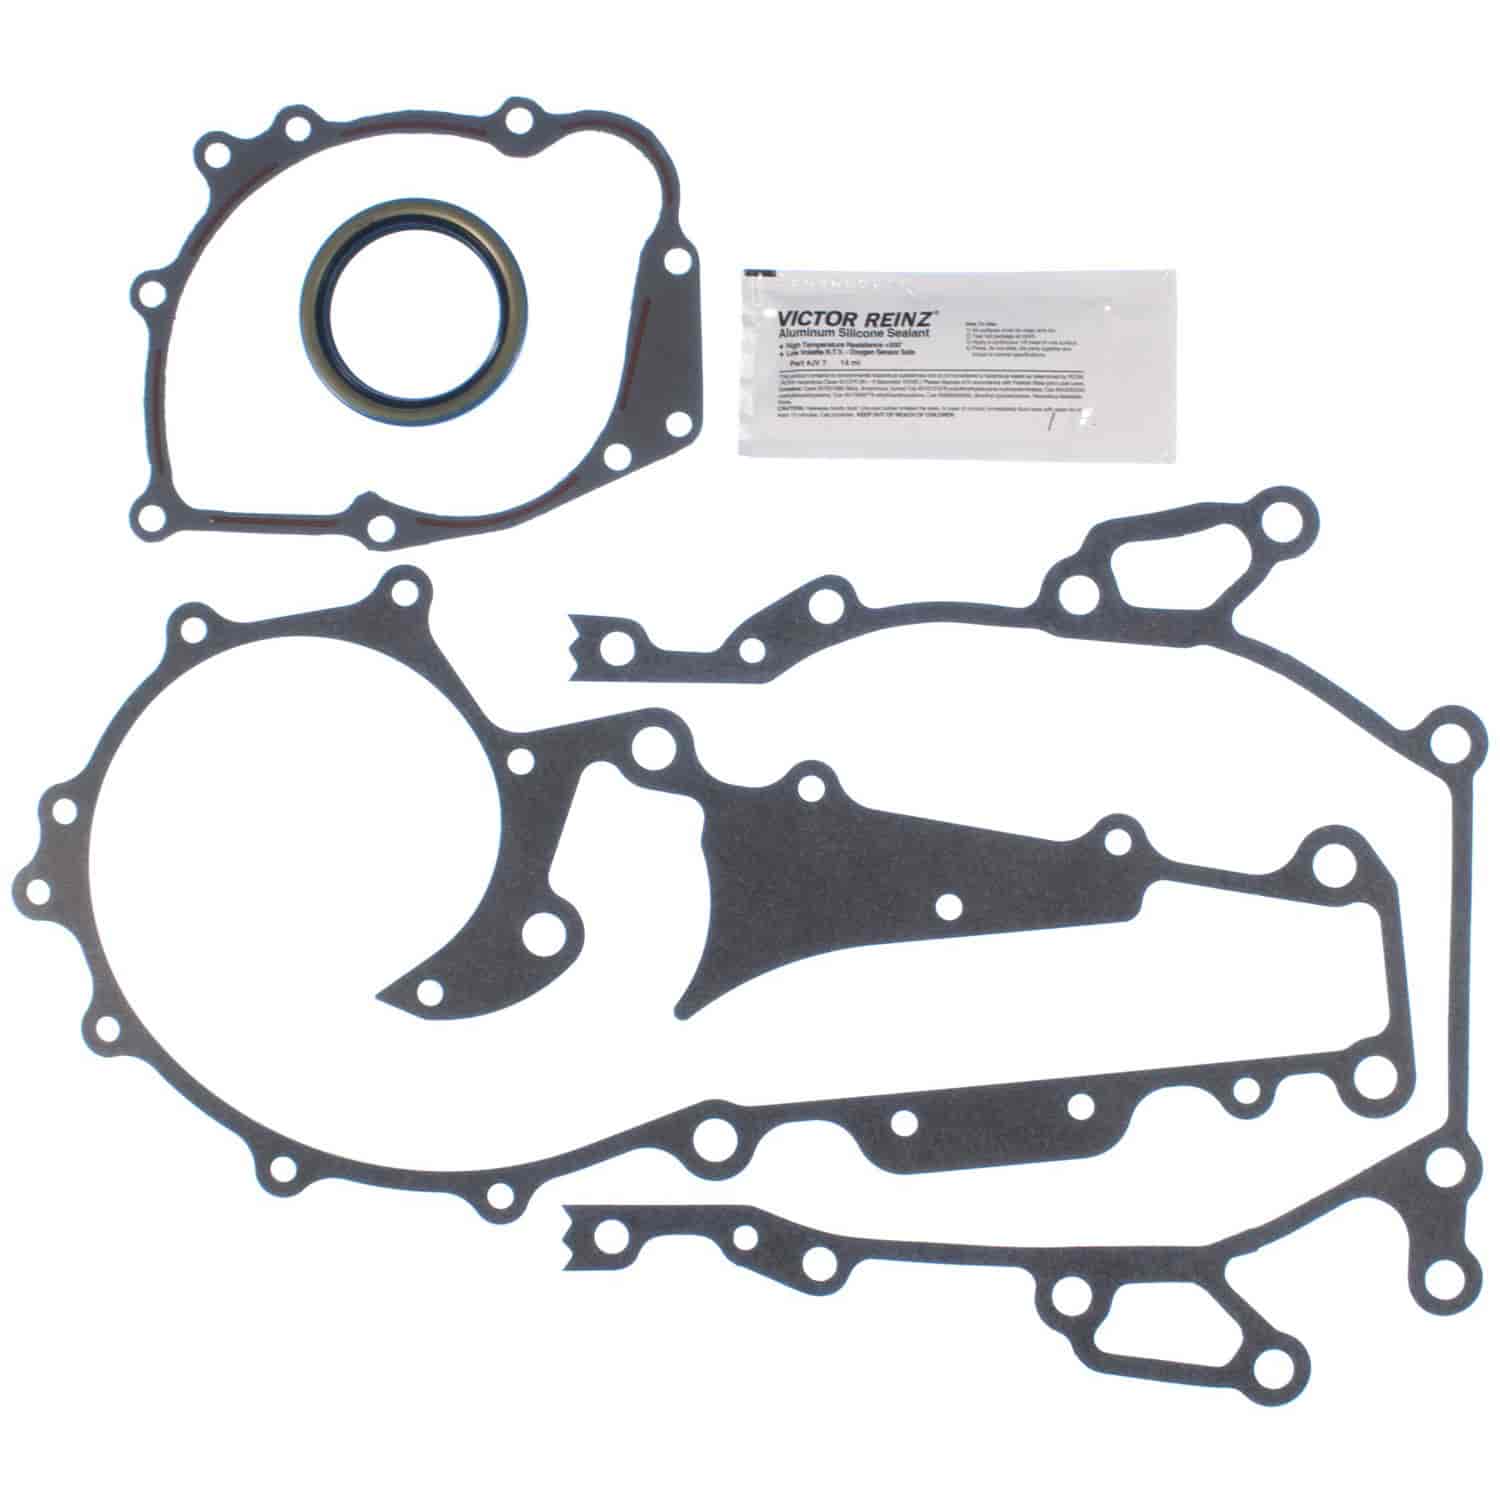 Timing Cover Set Cad 252 4.1L Eng. 86-88 Water Pump w/Bead On Flange